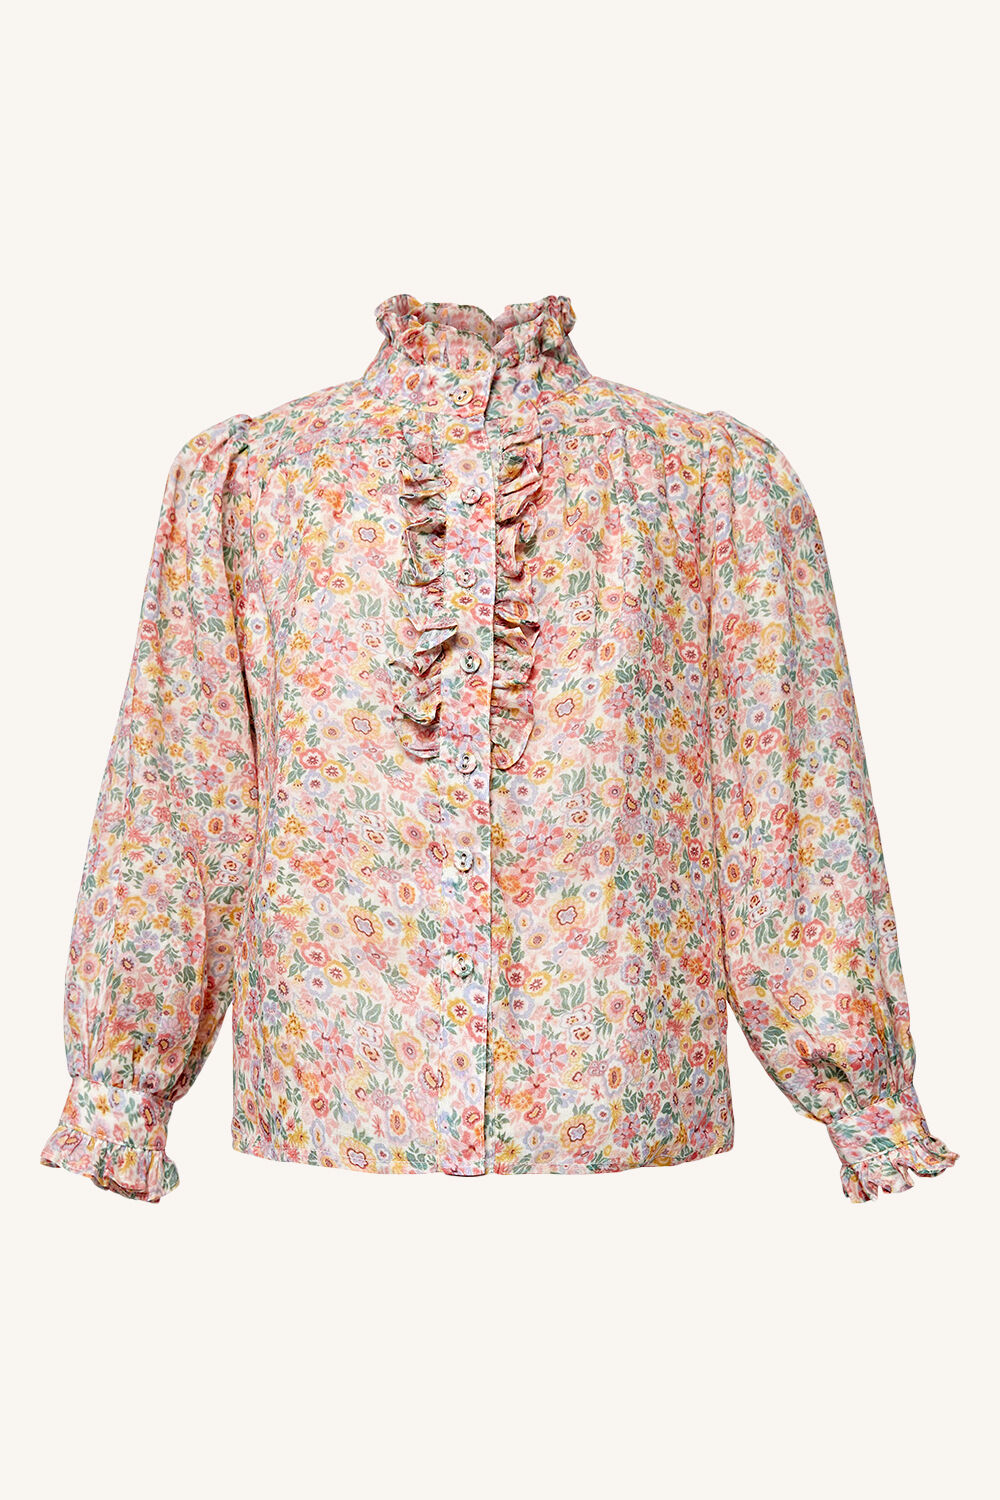 Girls AMELIA FLORAL BLOUSE in colour VIBRANT YELLOW